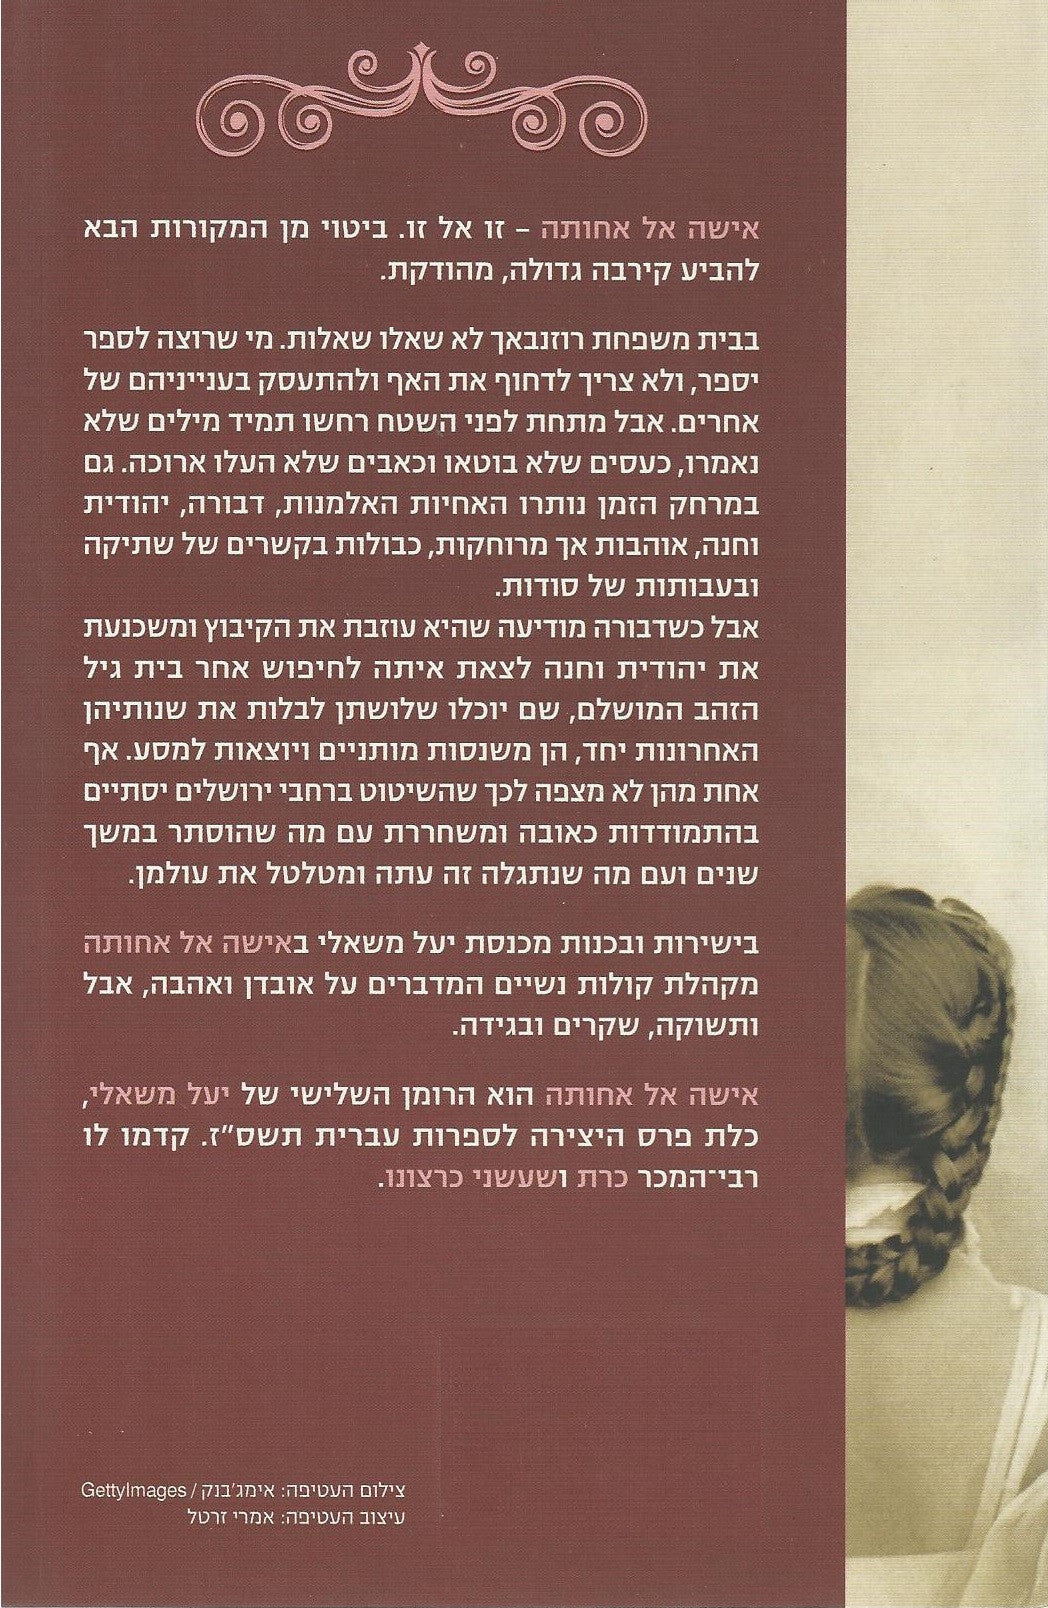 Women and Sisters - Yael Mishaly